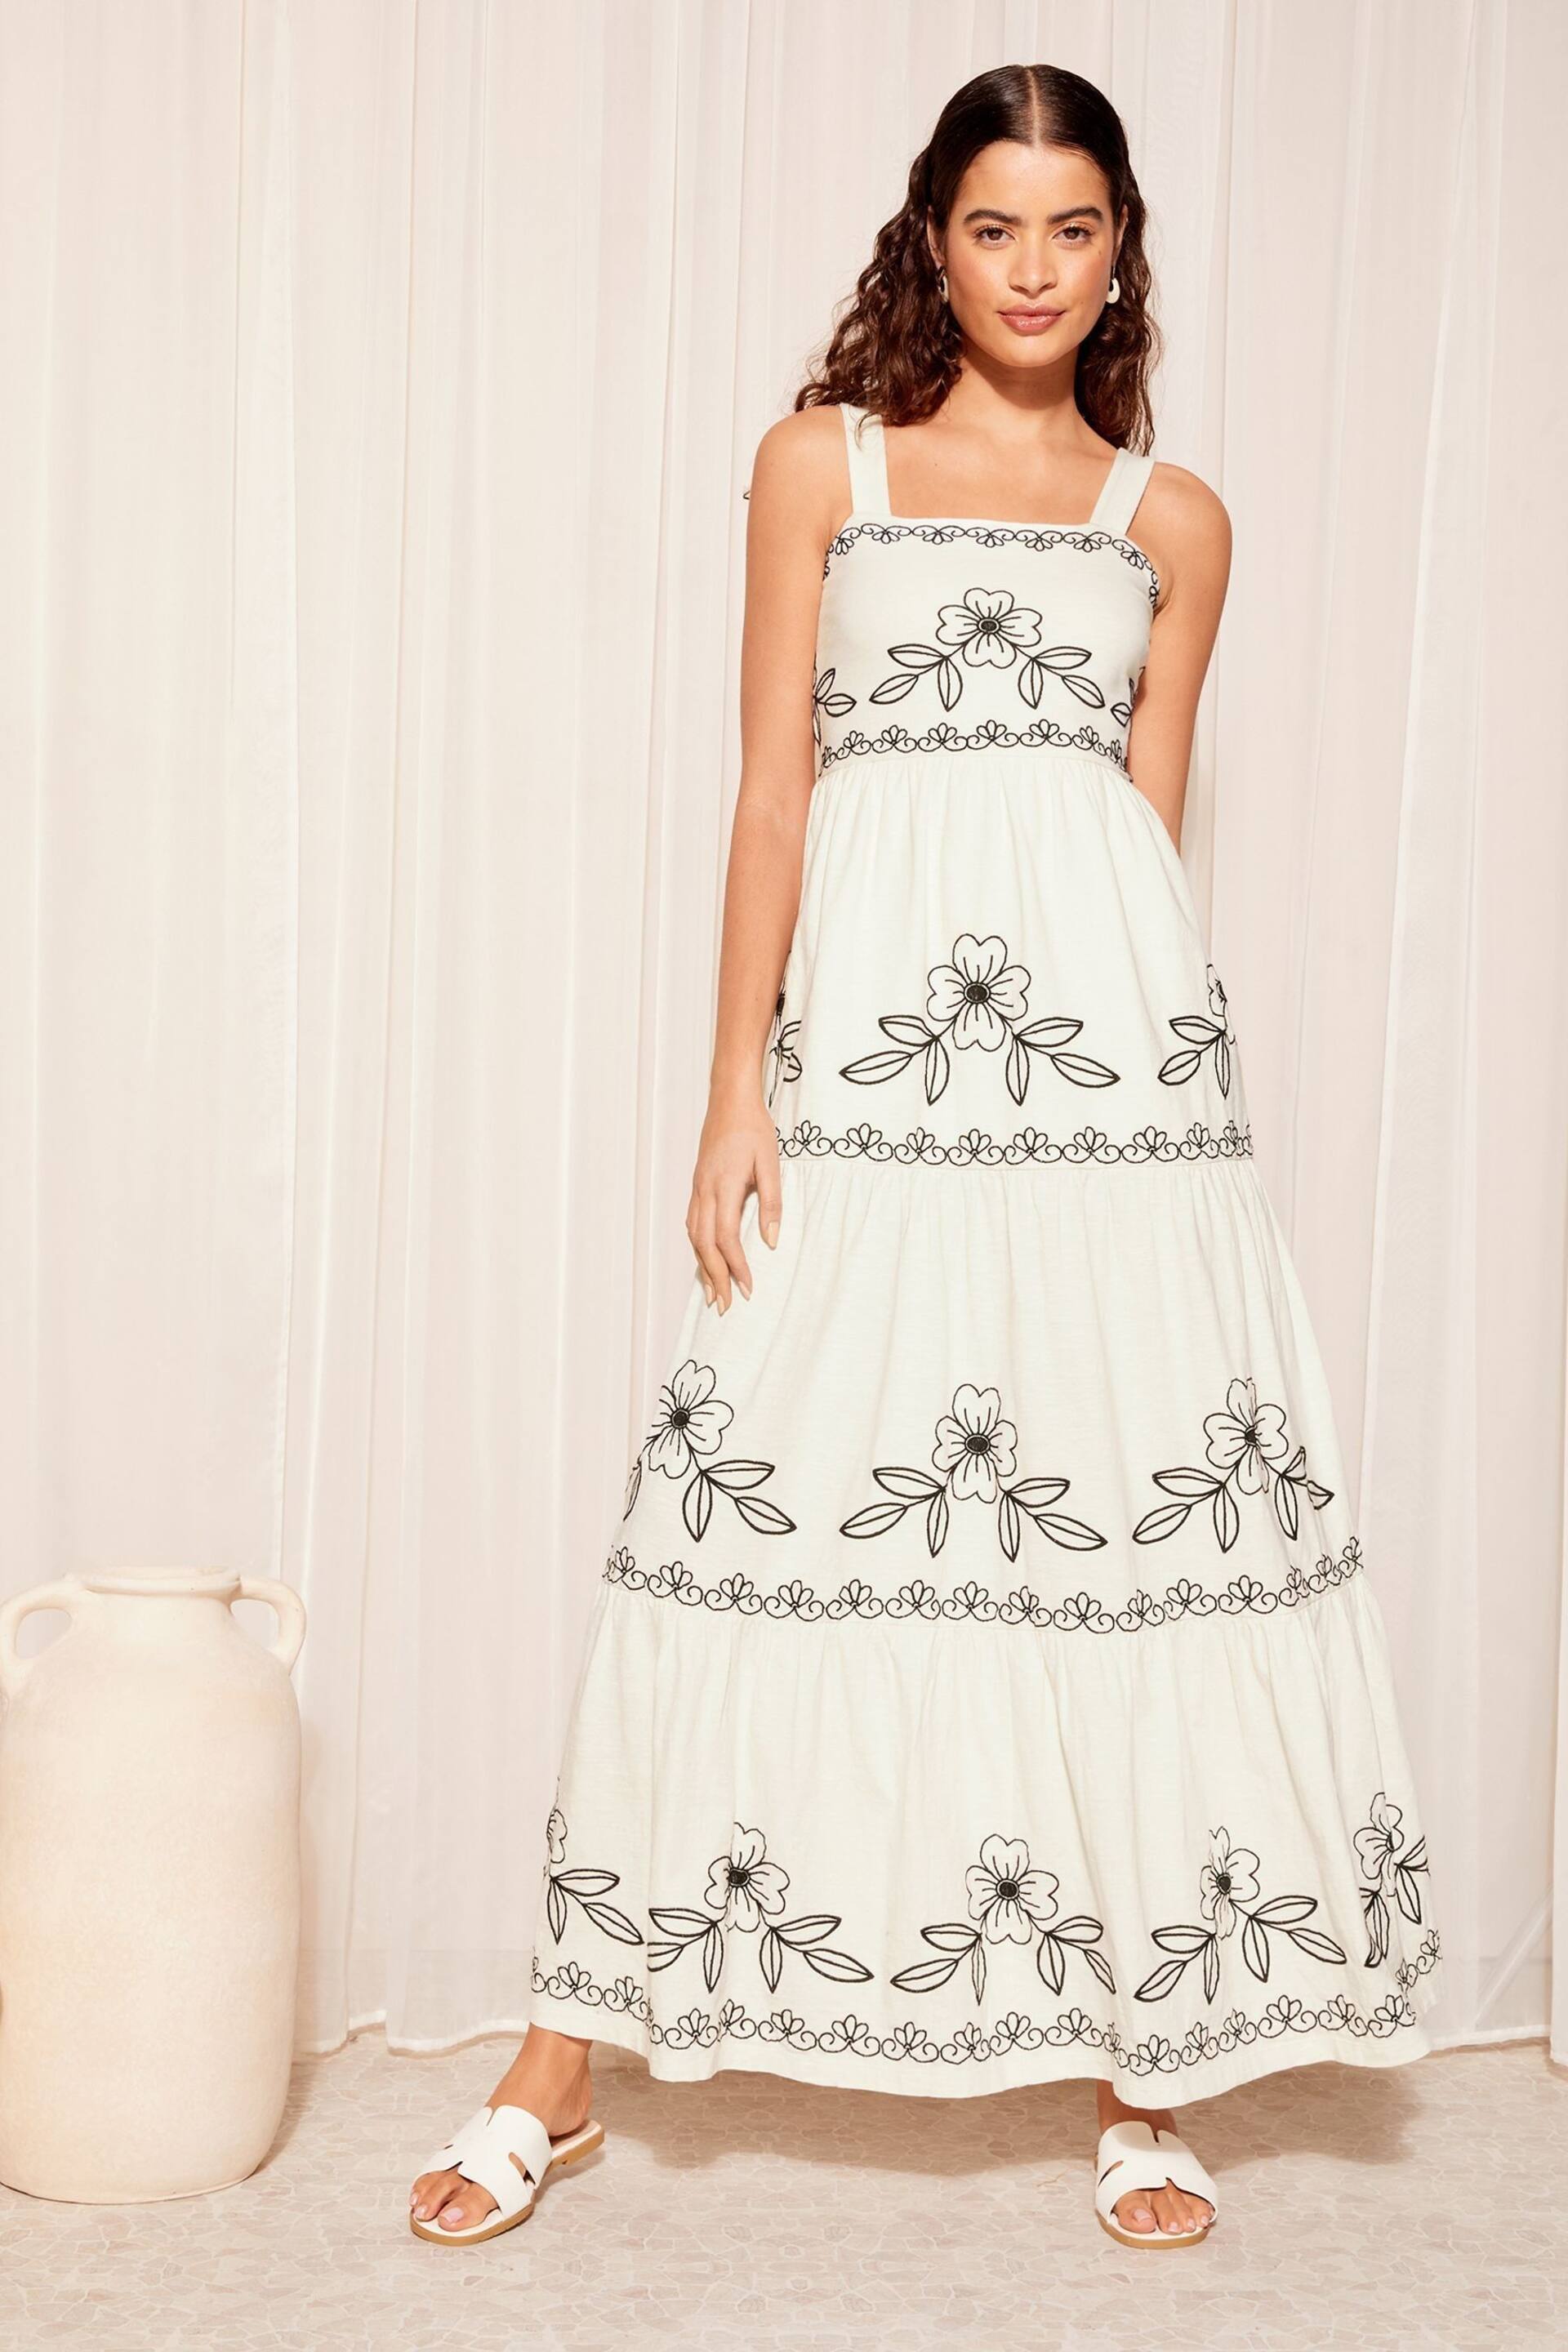 Friends Like These Ivory White Embroidered Tiered Strappy Maxi Dress - Image 1 of 4